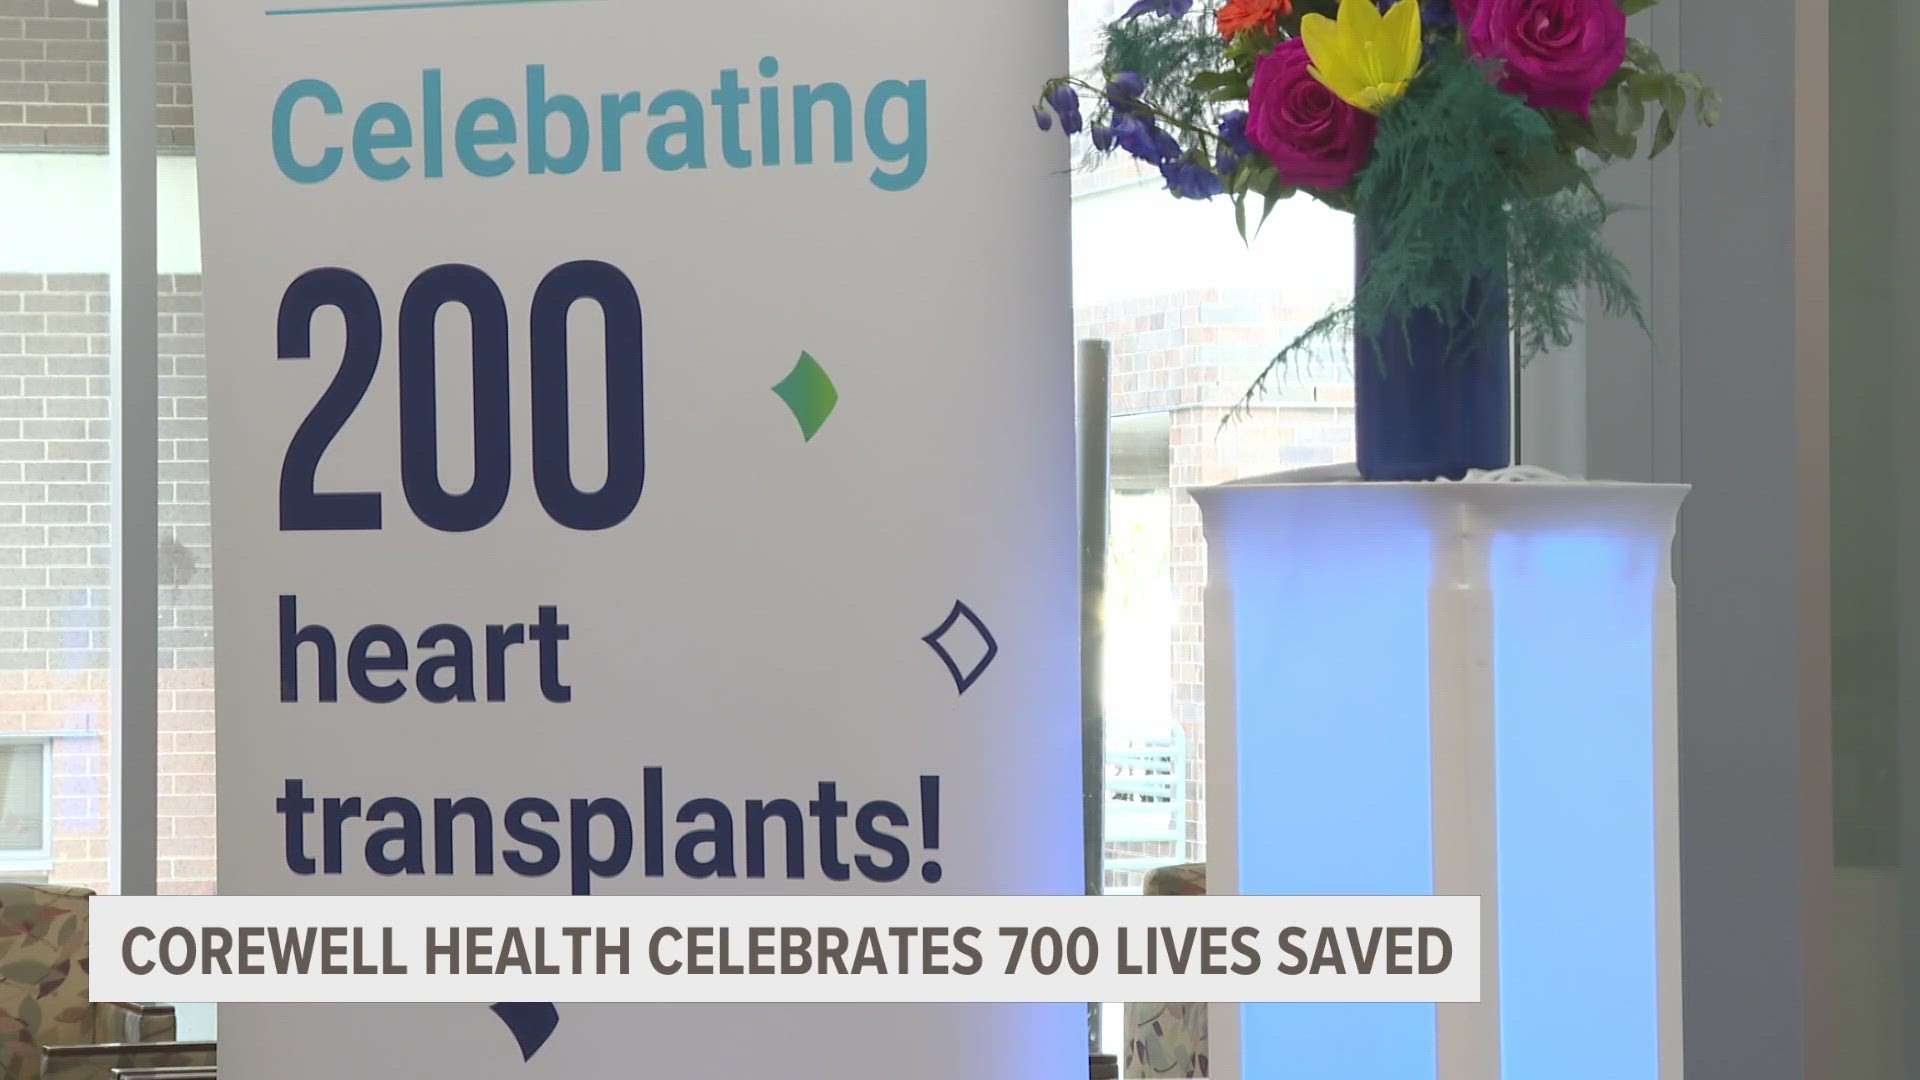 The Richard DeVos Heart and Lung Transplant Program has done 200 heart transplants since the first one in 2010. It's also placed 500 ventricular assist devices.